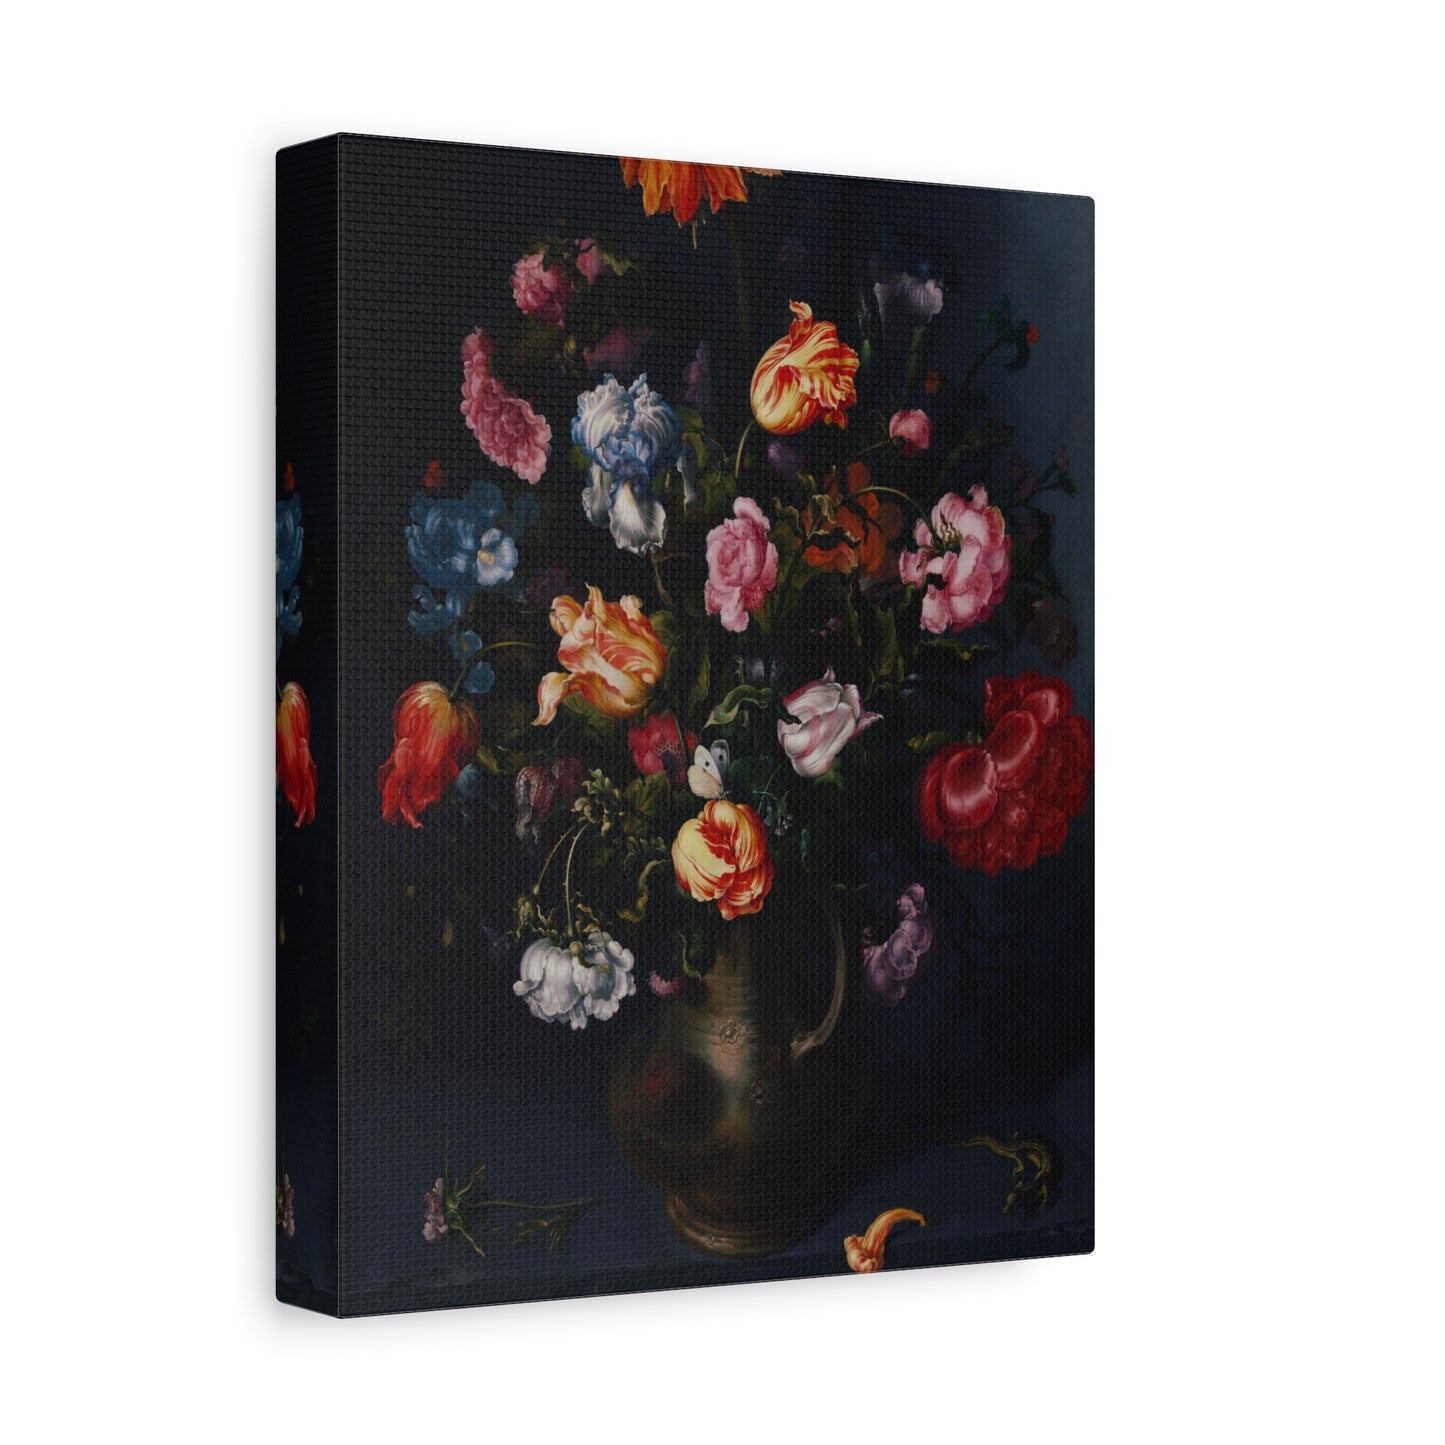 A Moody Vase with Flowers Canvas Print